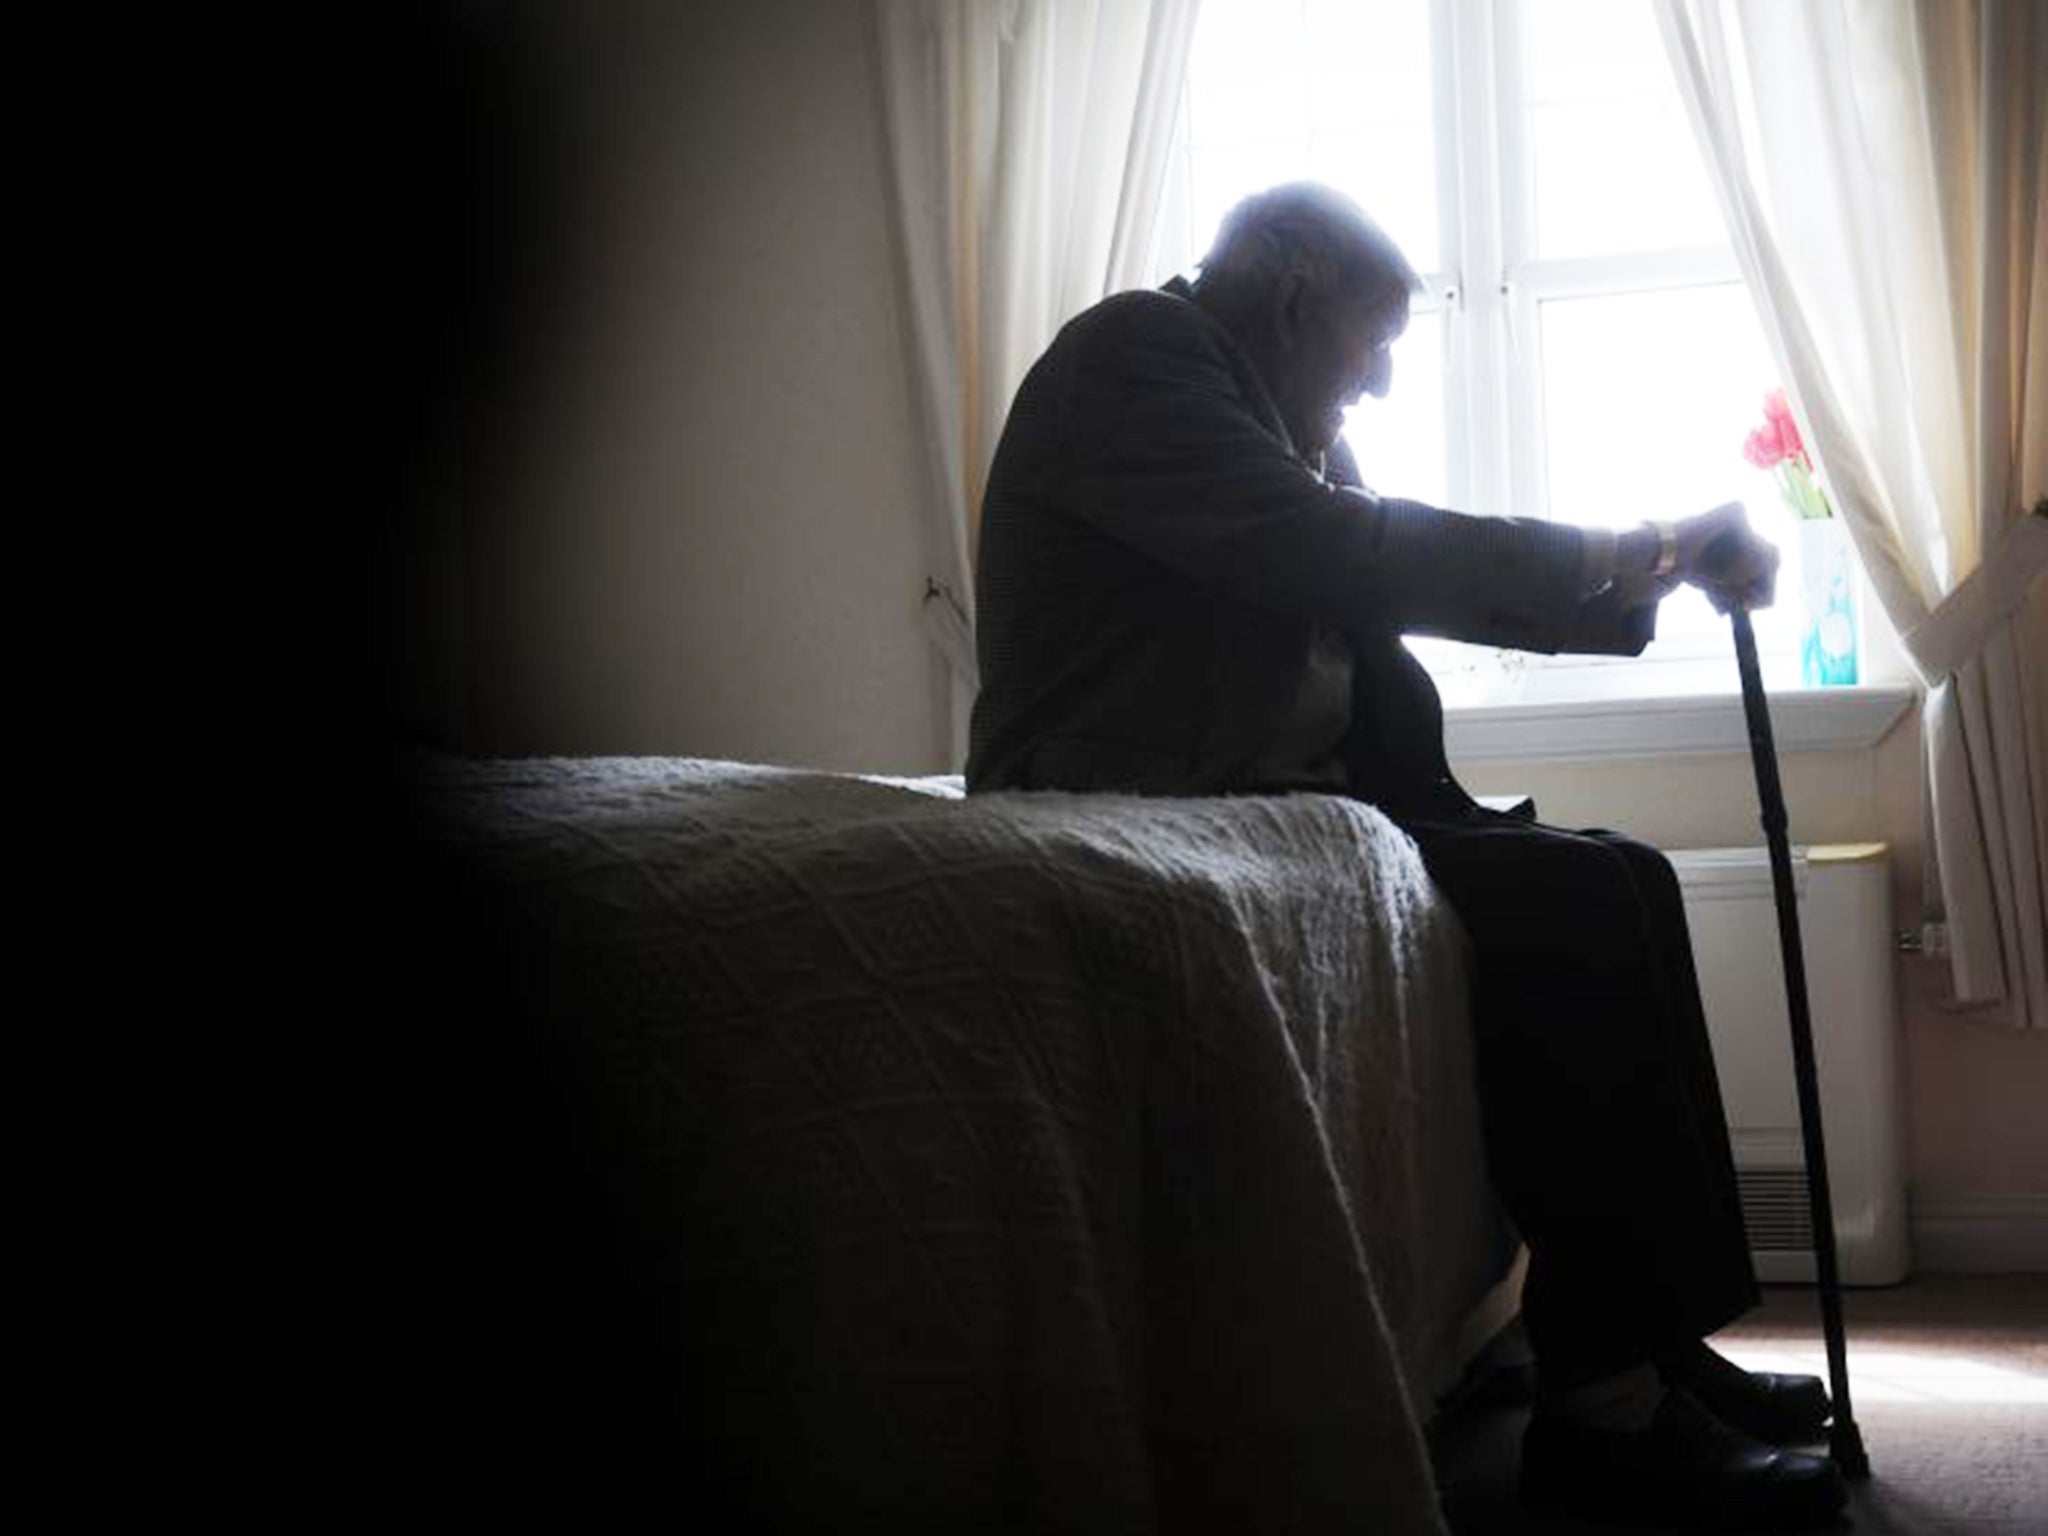 Elderly Care In England Is Unacceptable In A Civilised Society Says